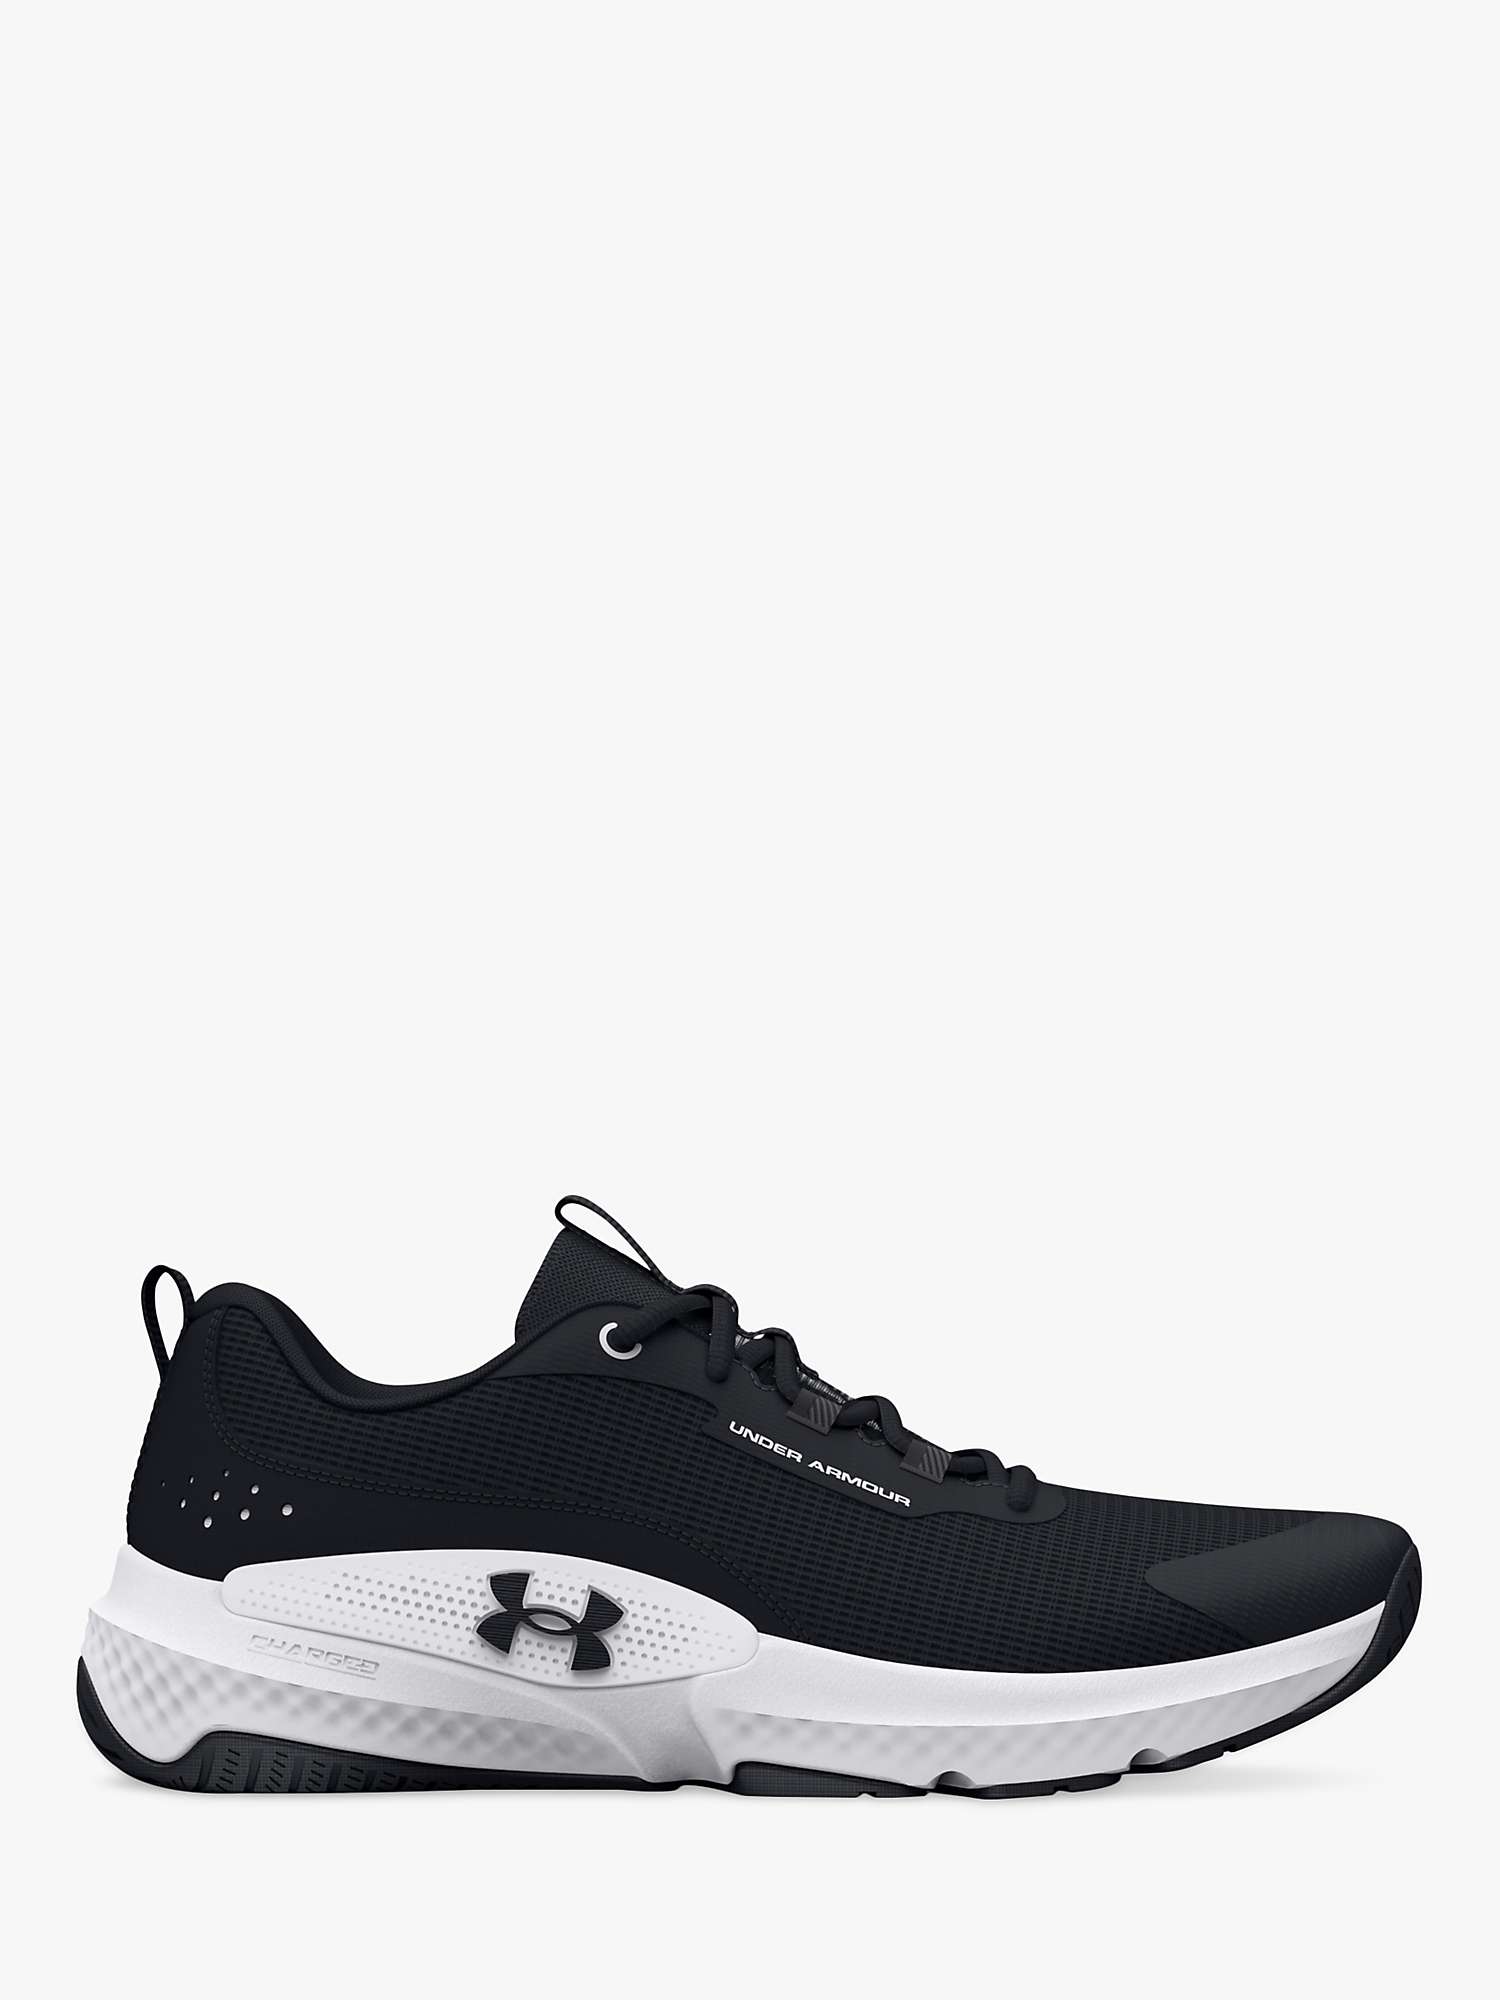 Buy Under Armour Dynamic Select Men's Cross Trainers Online at johnlewis.com